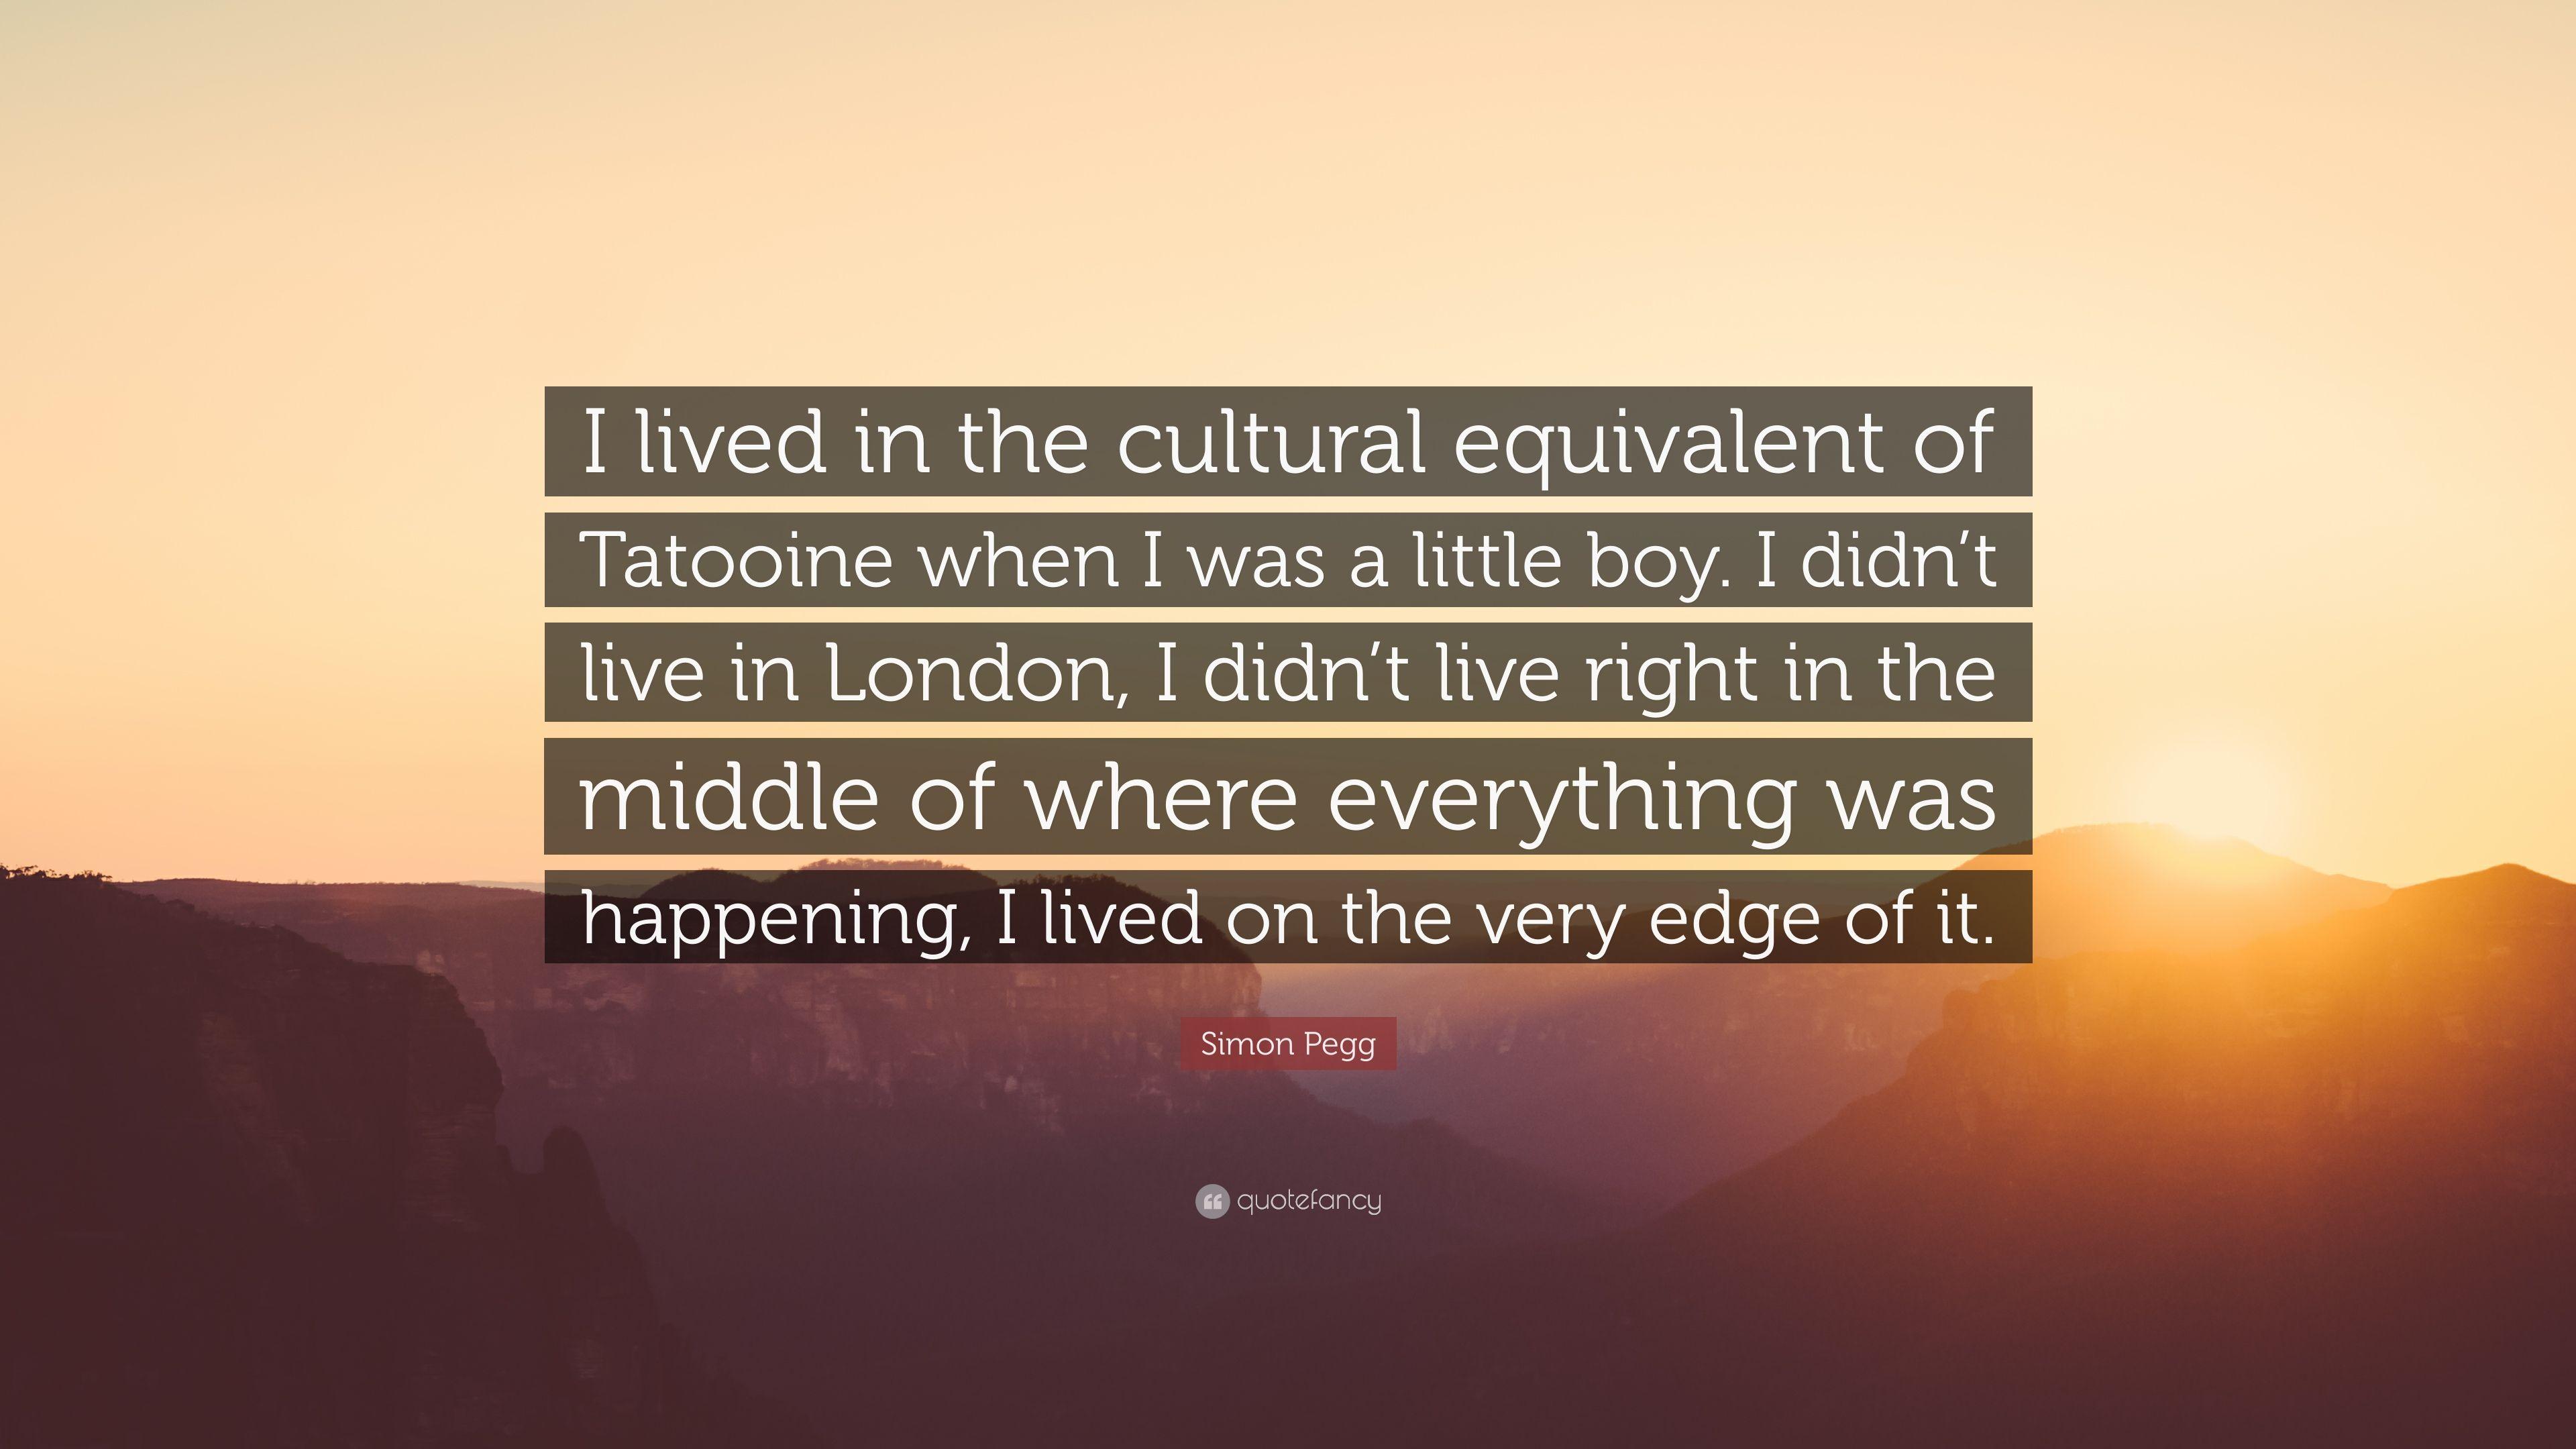 Simon Pegg Quote: “I lived in the cultural equivalent of Tatooine